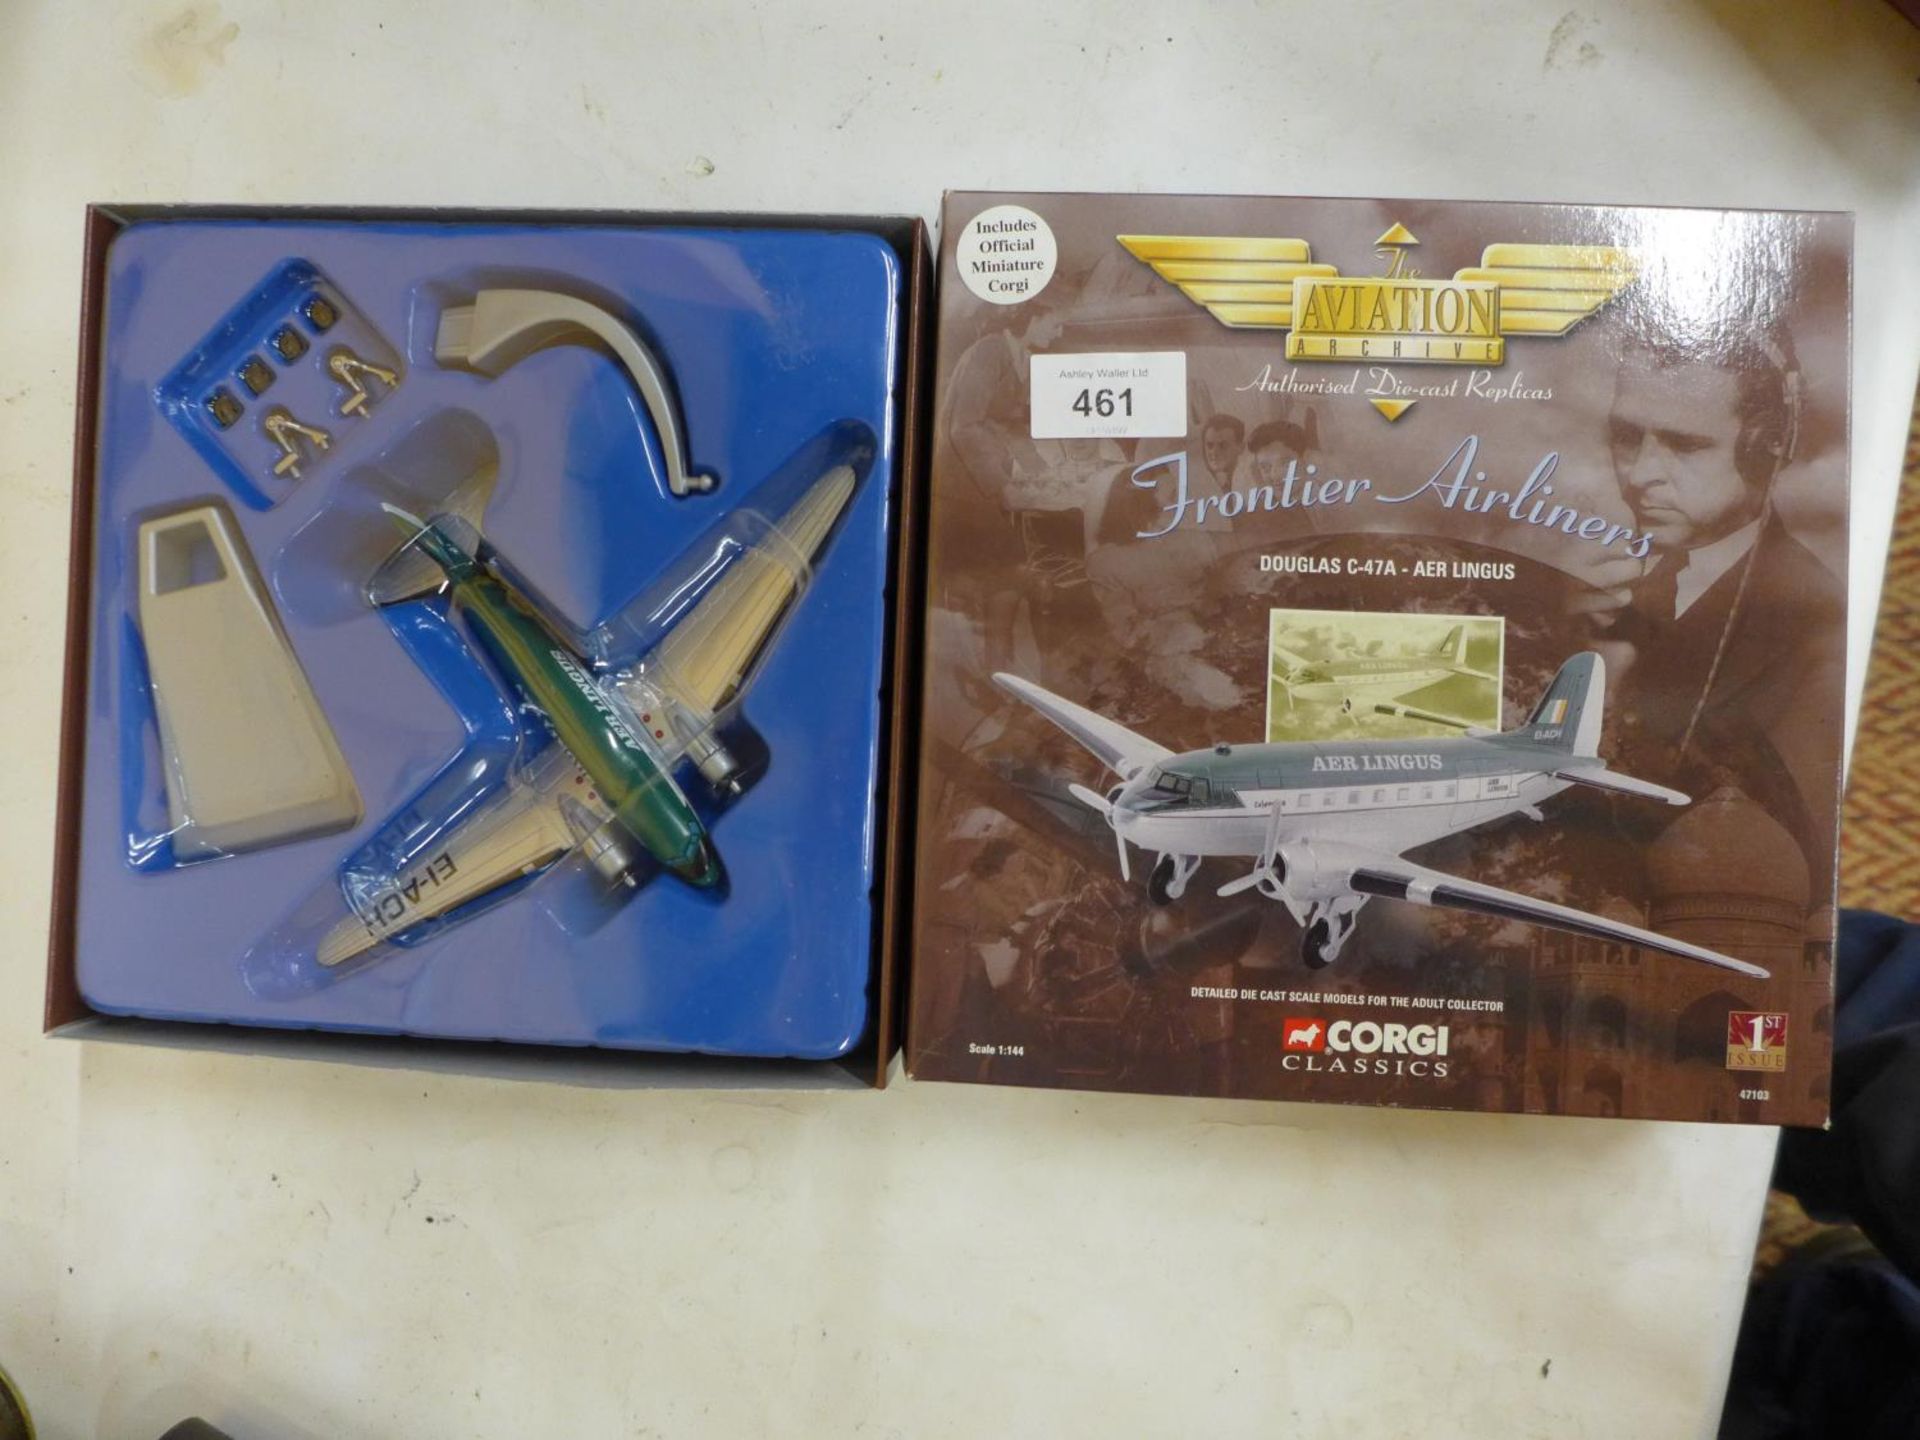 A BOXED FRONTIER AIRLINES MODEL OF A DOUGLAS C-47A